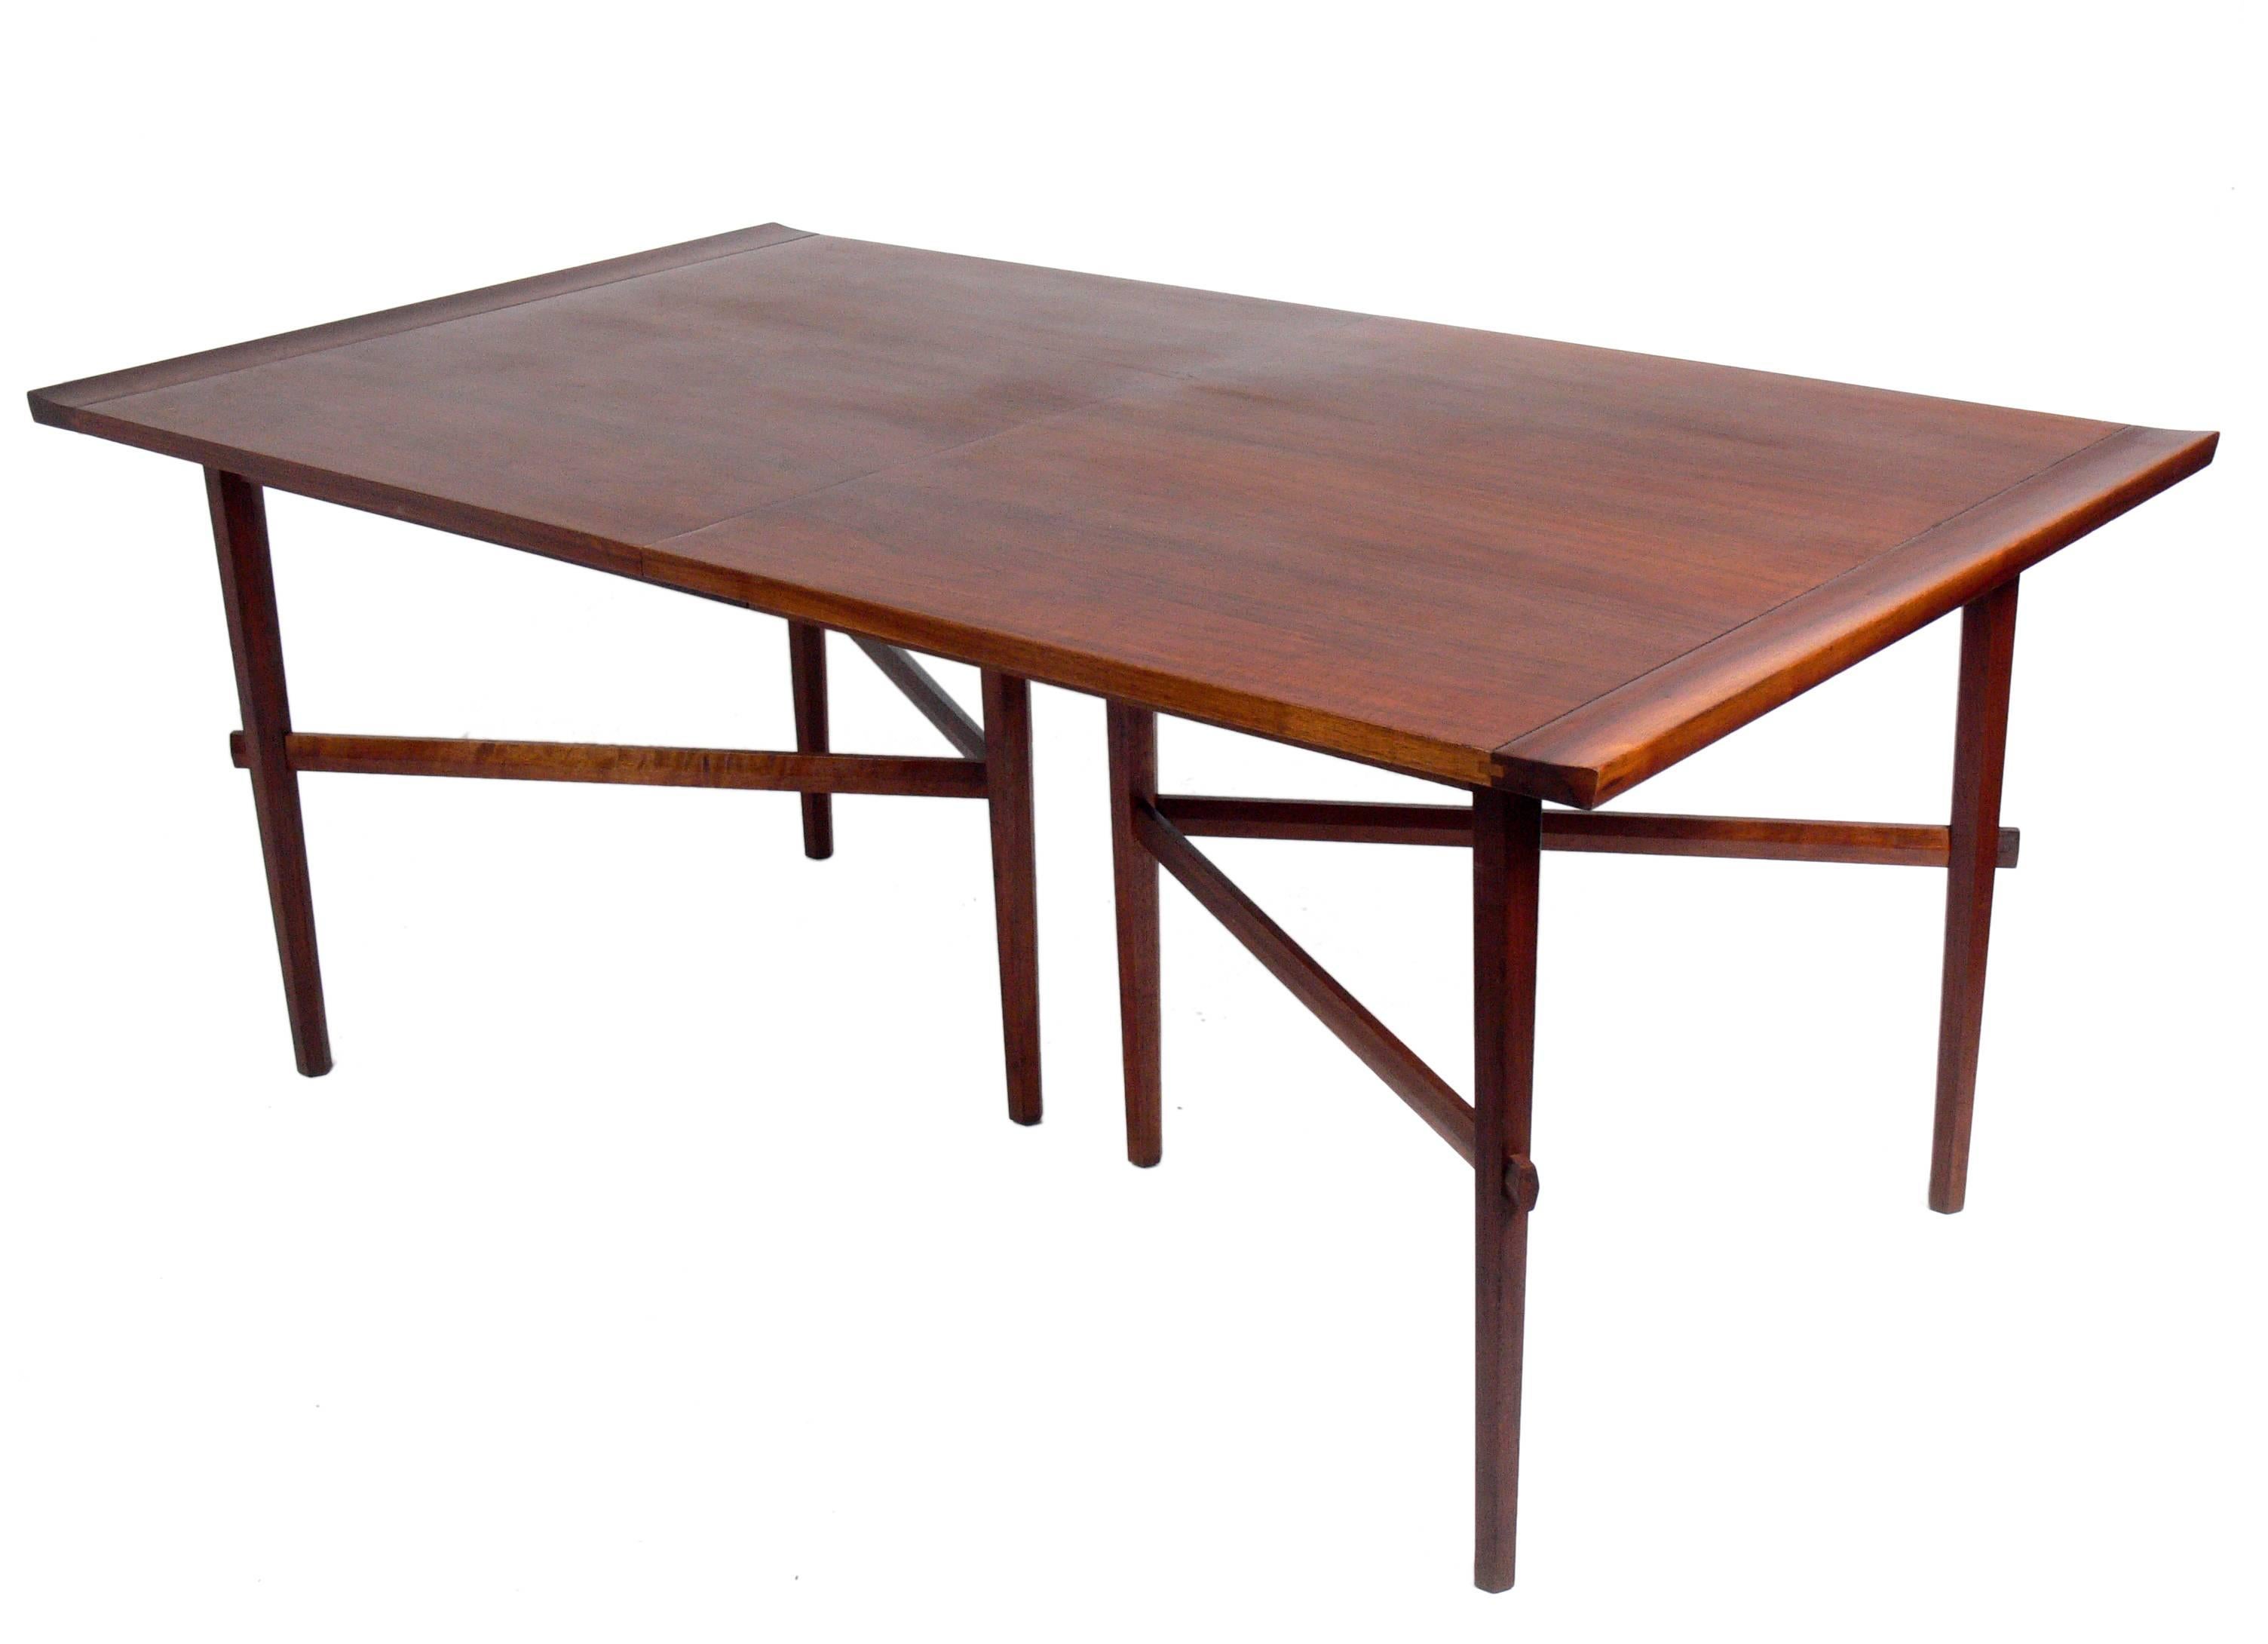 Upholstery Dining Table and Chairs by George Nakashima for Widdicomb